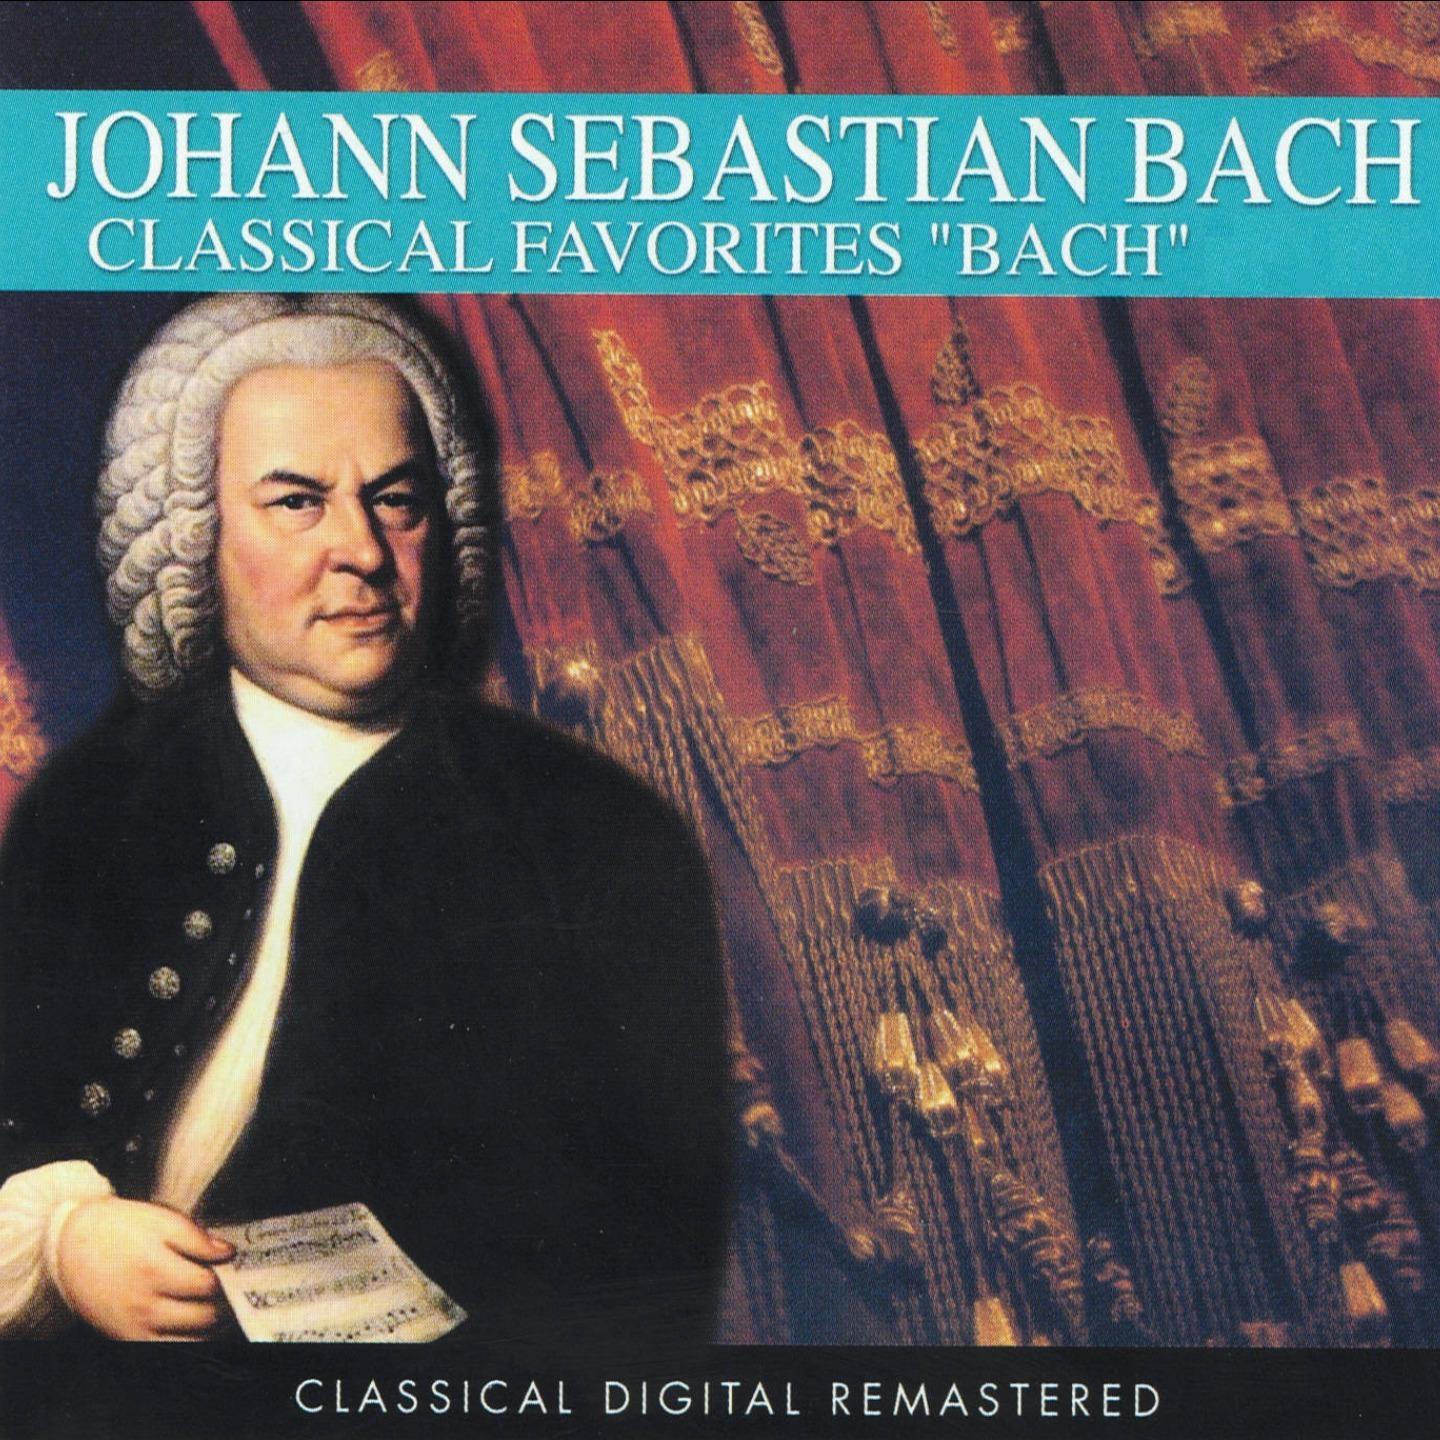 Suite for Orchestra No. 3, in D Major, BWV 1068: Gigue